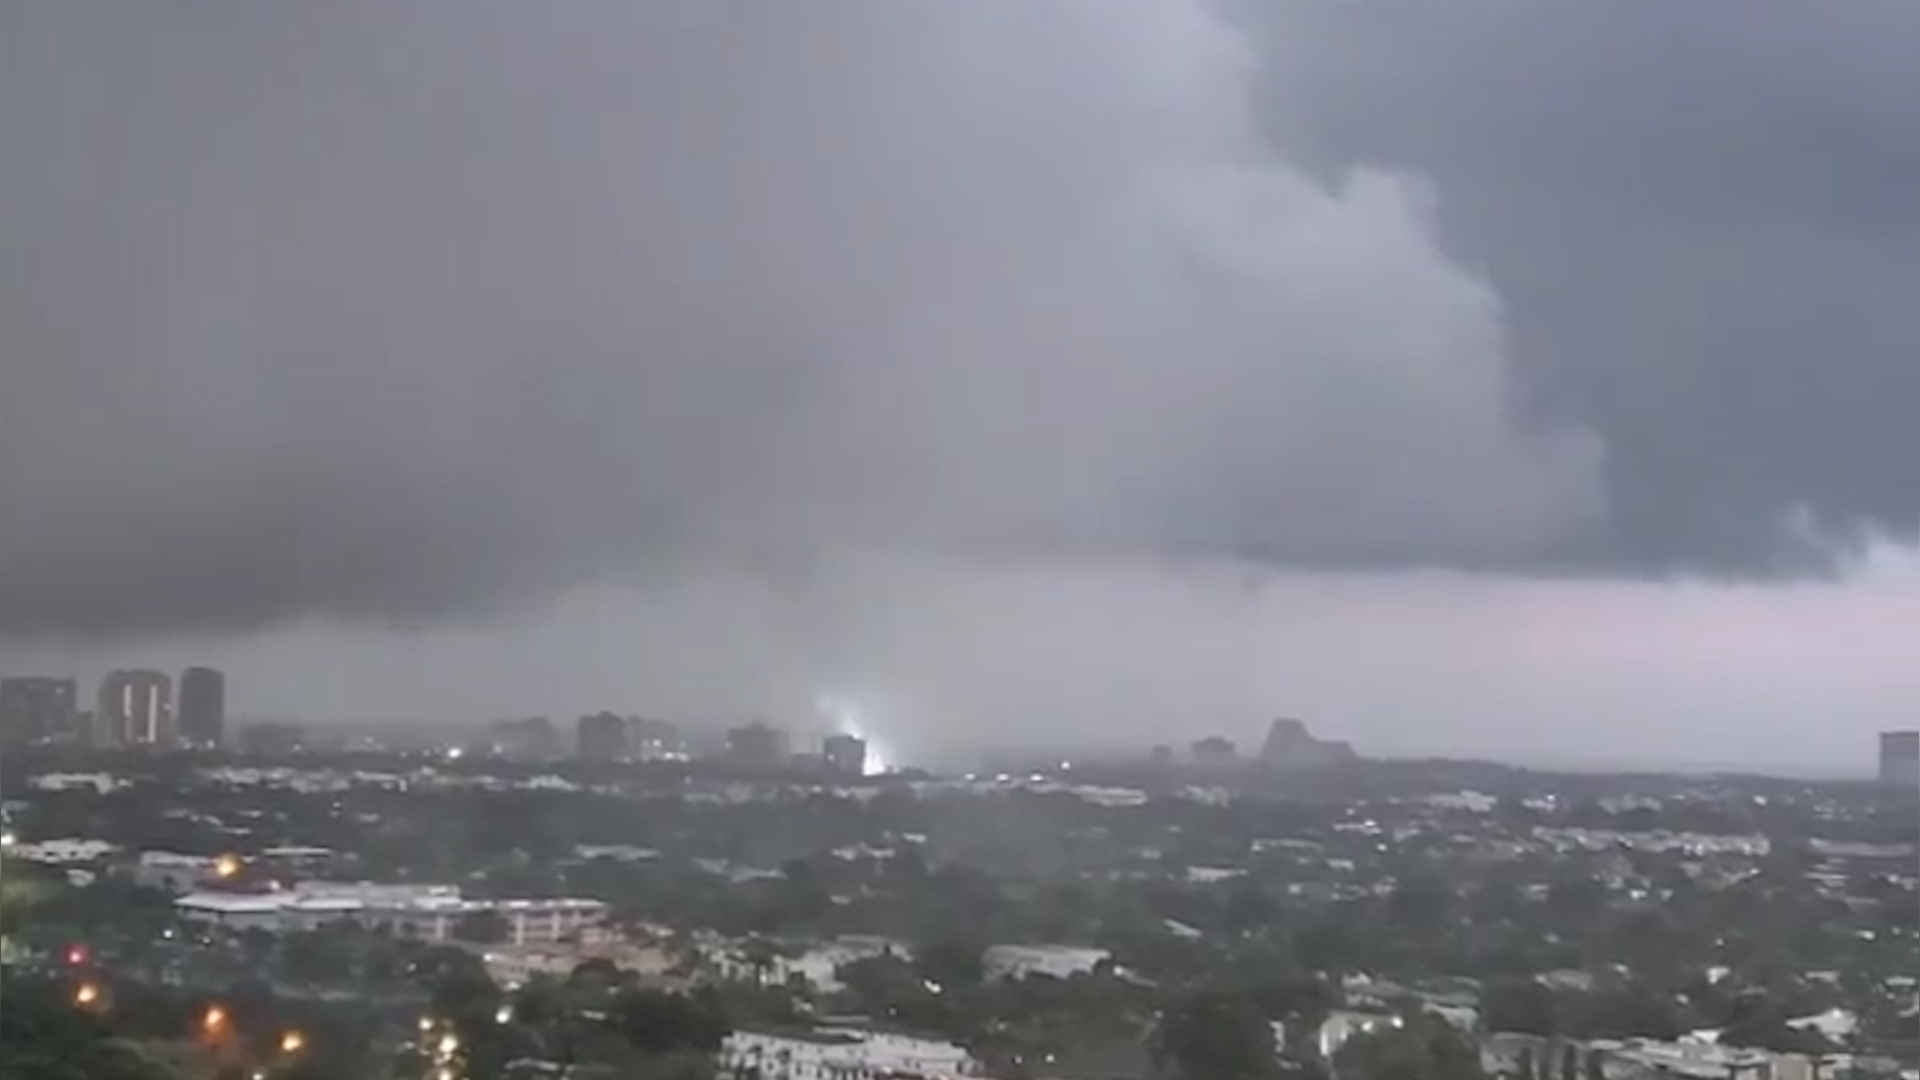 Still picture taken from the video shared by our app user as the tornado hits the transformer.